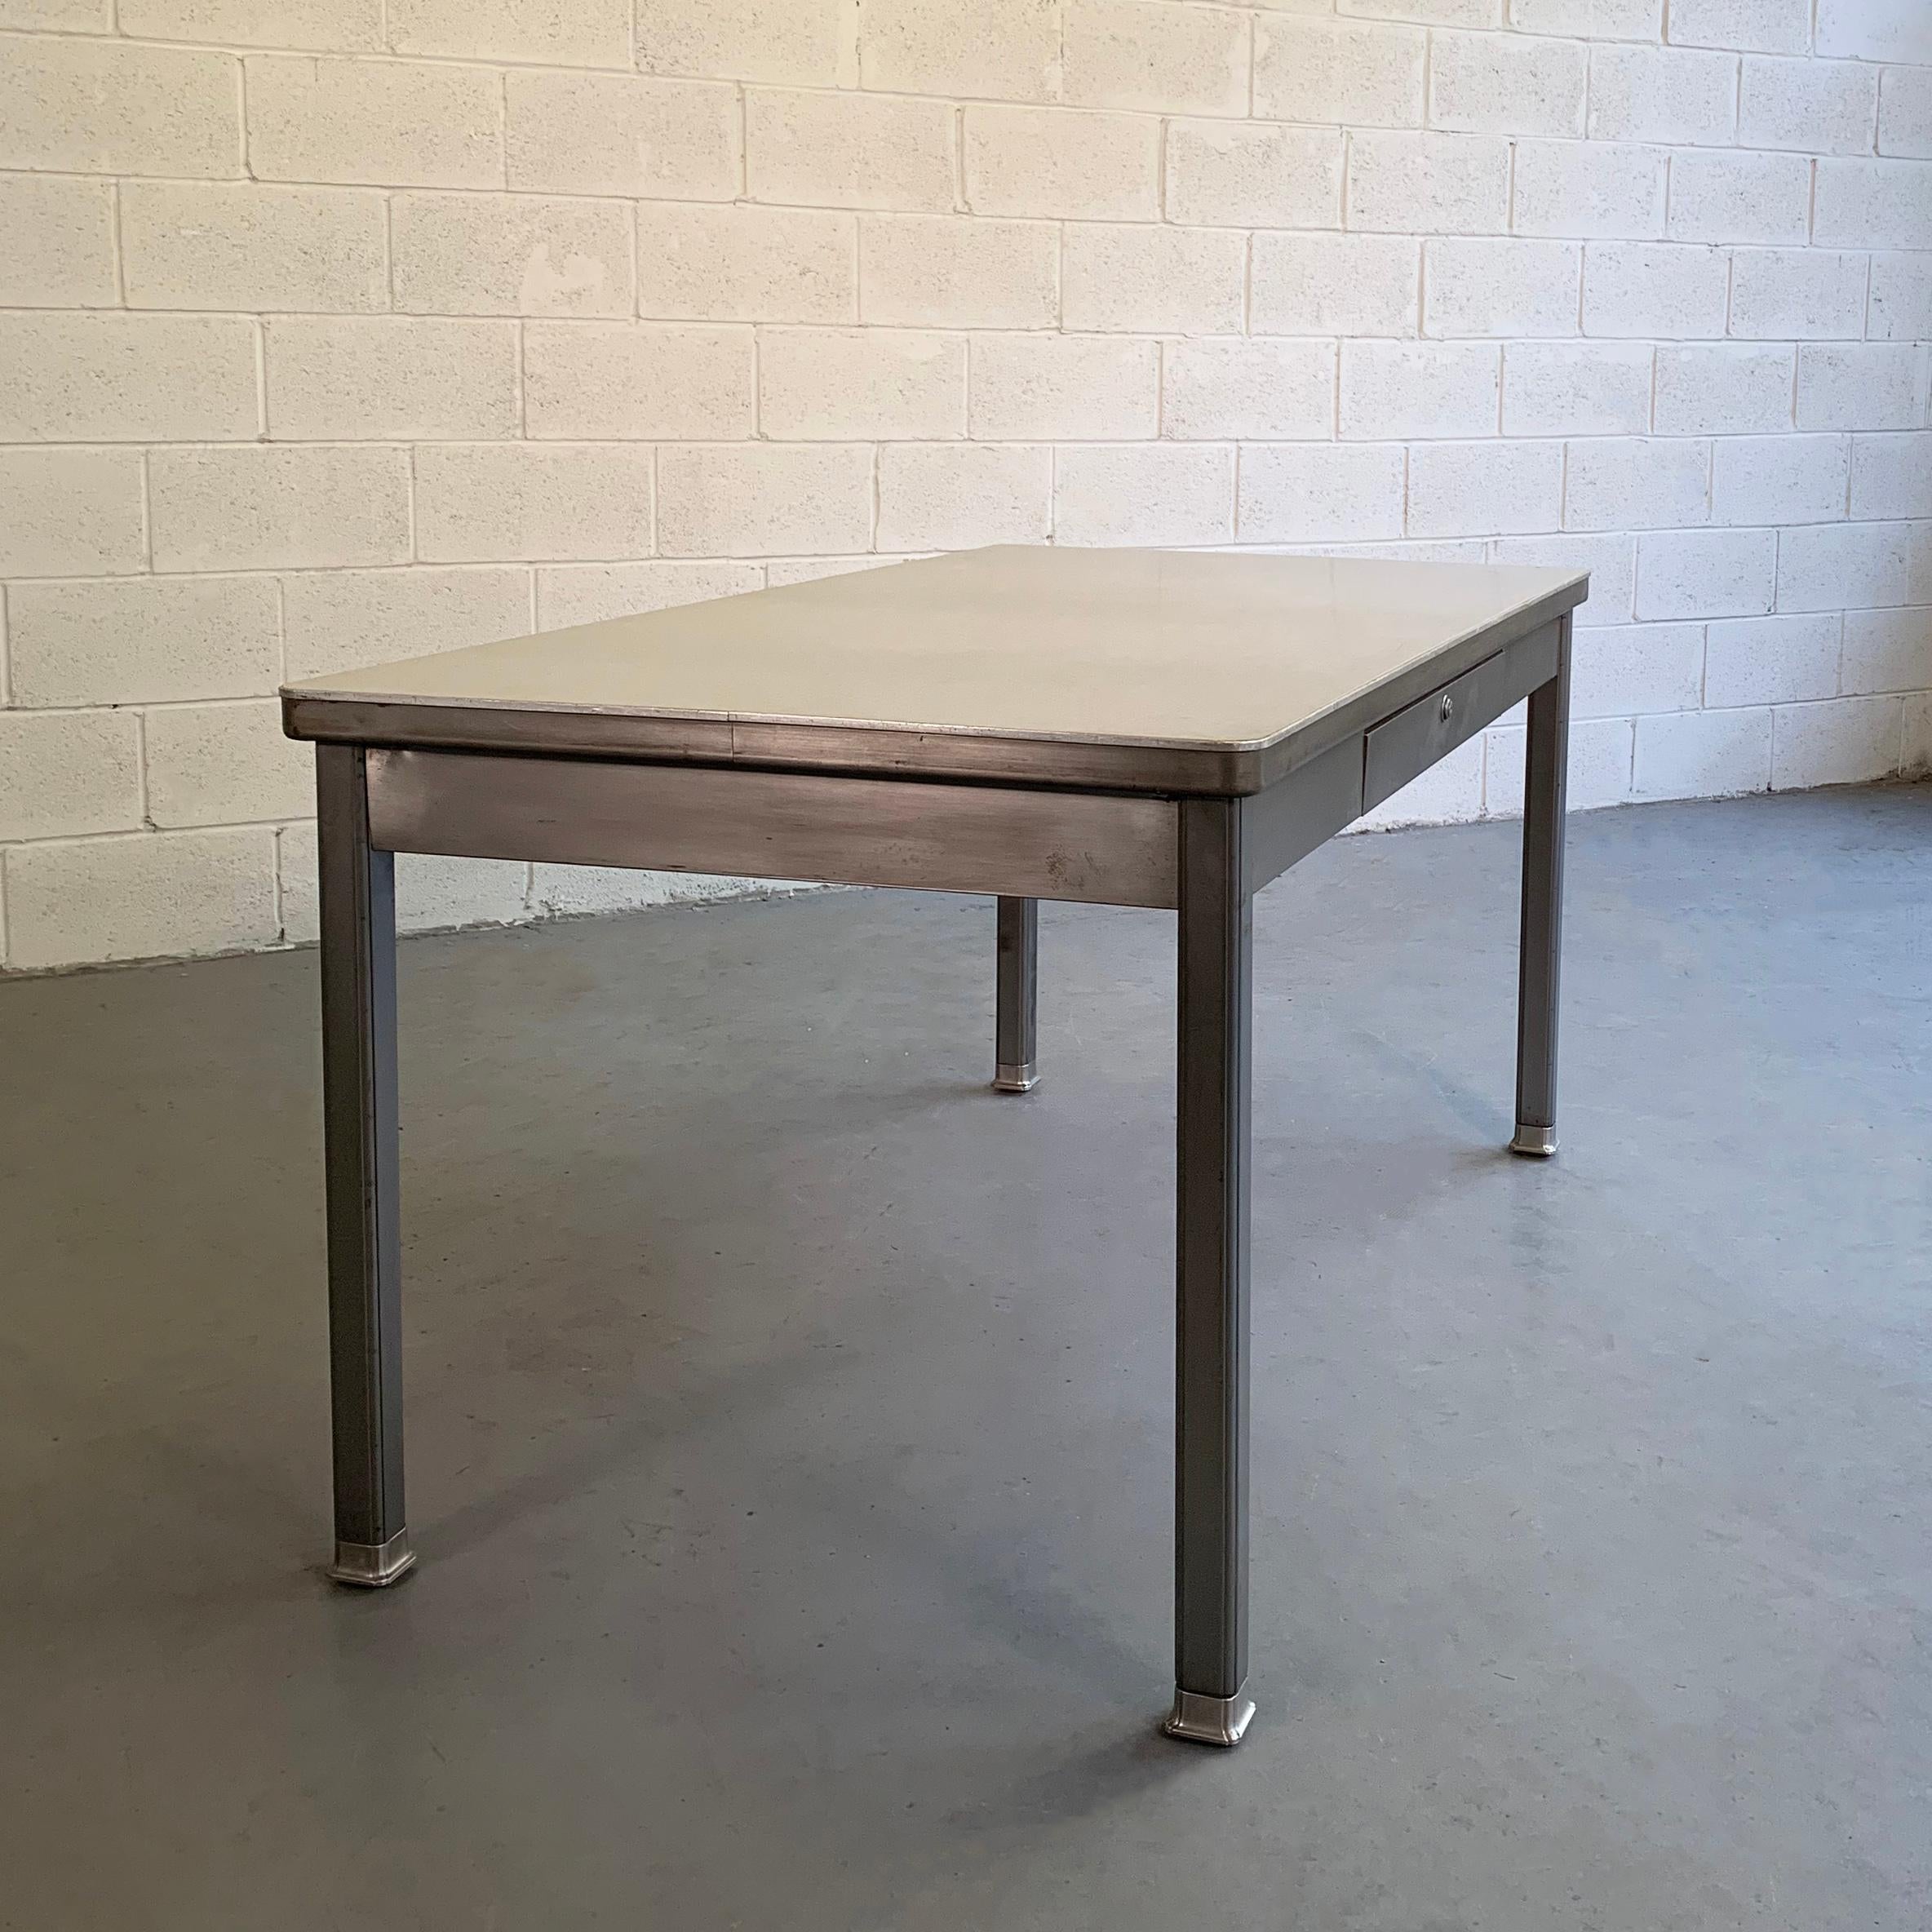 American Industrial Midcentury Police Station Desk by General Fire Proofing Company